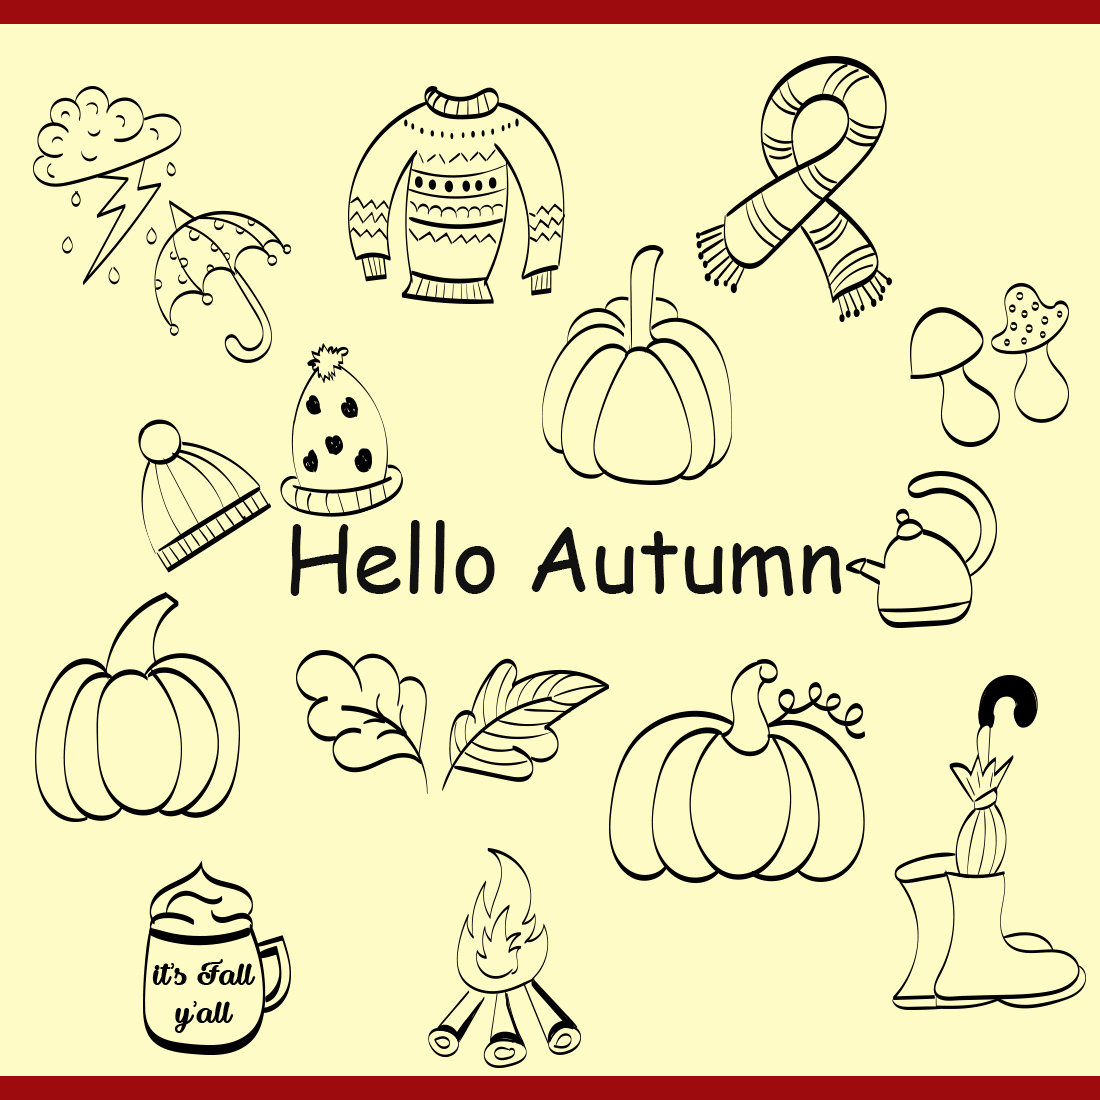 Fall Greeting Card Design cover image.